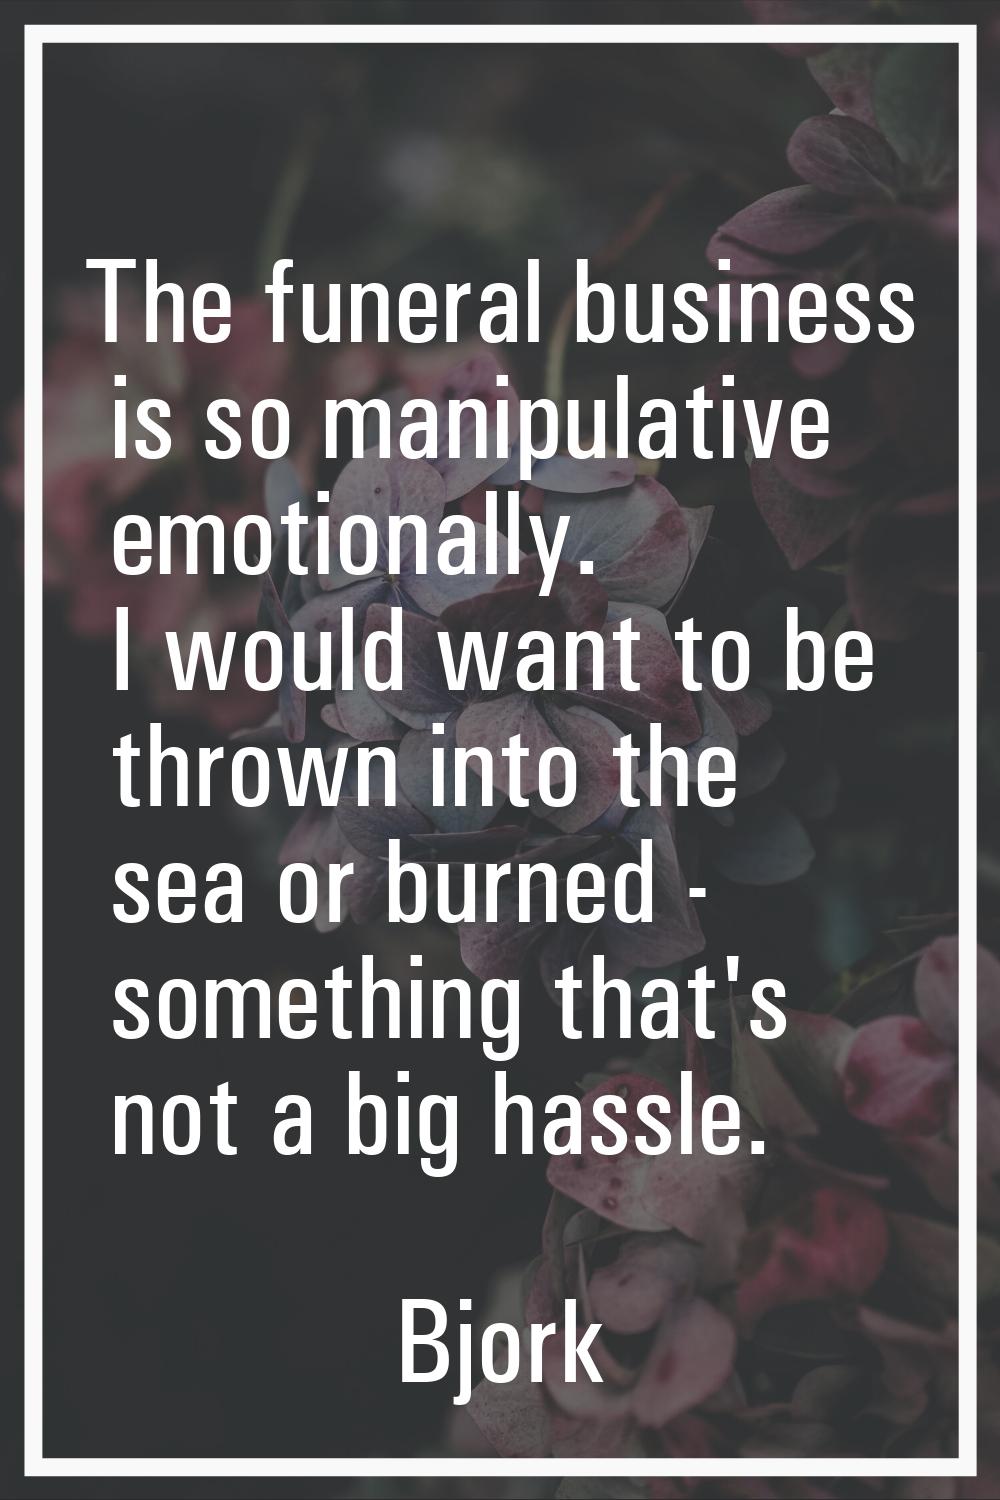 The funeral business is so manipulative emotionally. I would want to be thrown into the sea or burn